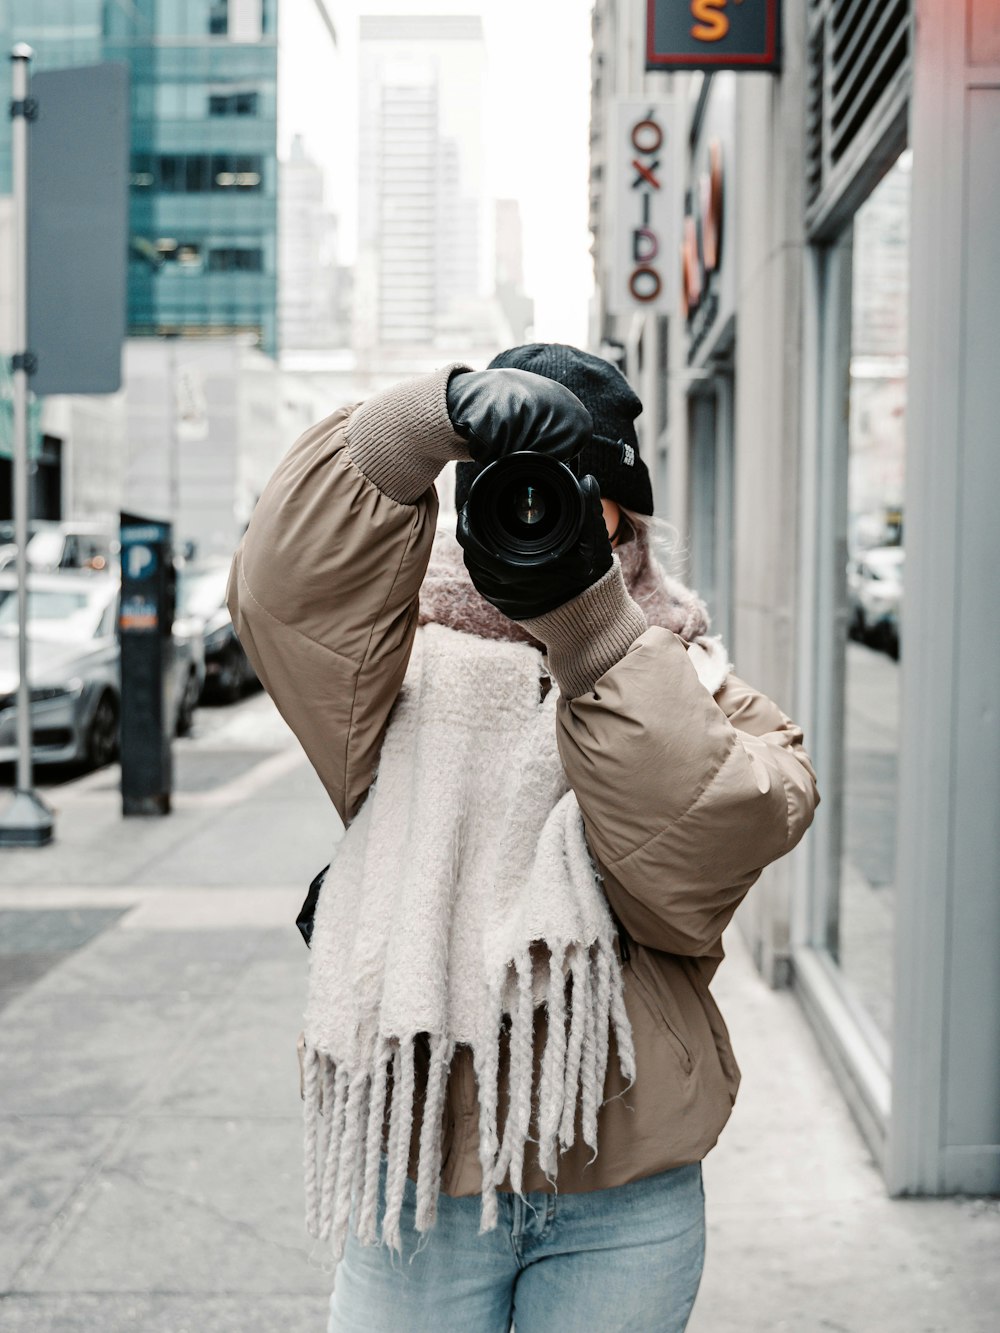 person in black leather jacket holding black camera photo – Free  Photographer standing Image on Unsplash